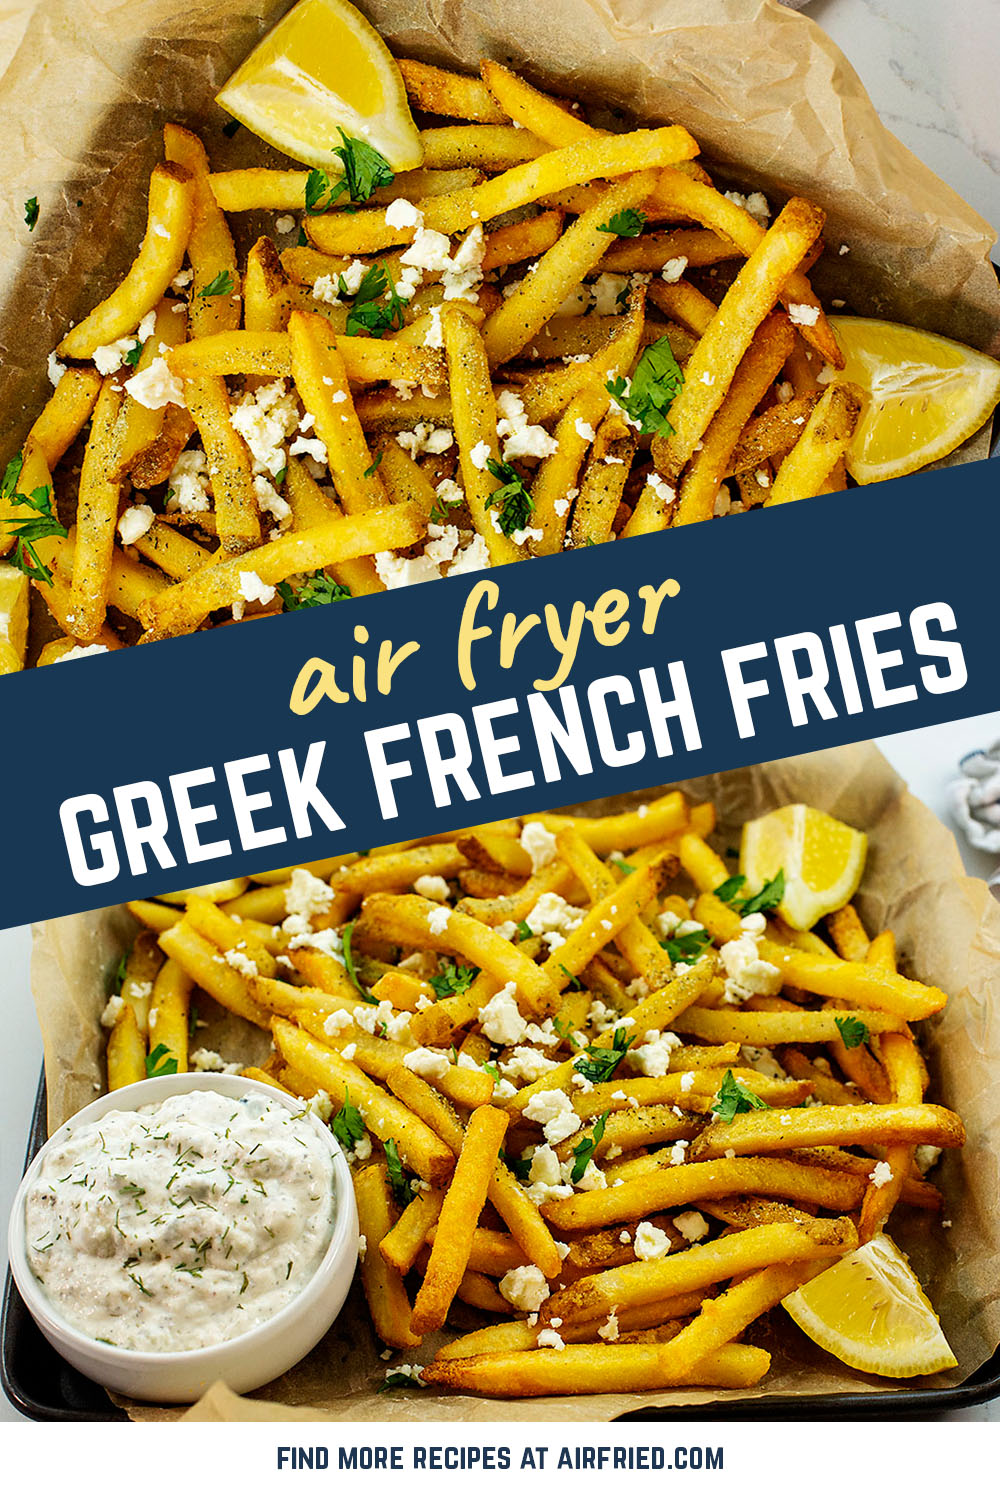 This is a great recipe to make your own Greek fries at home in your air fryer!  It is simple with Greek seasoning, 